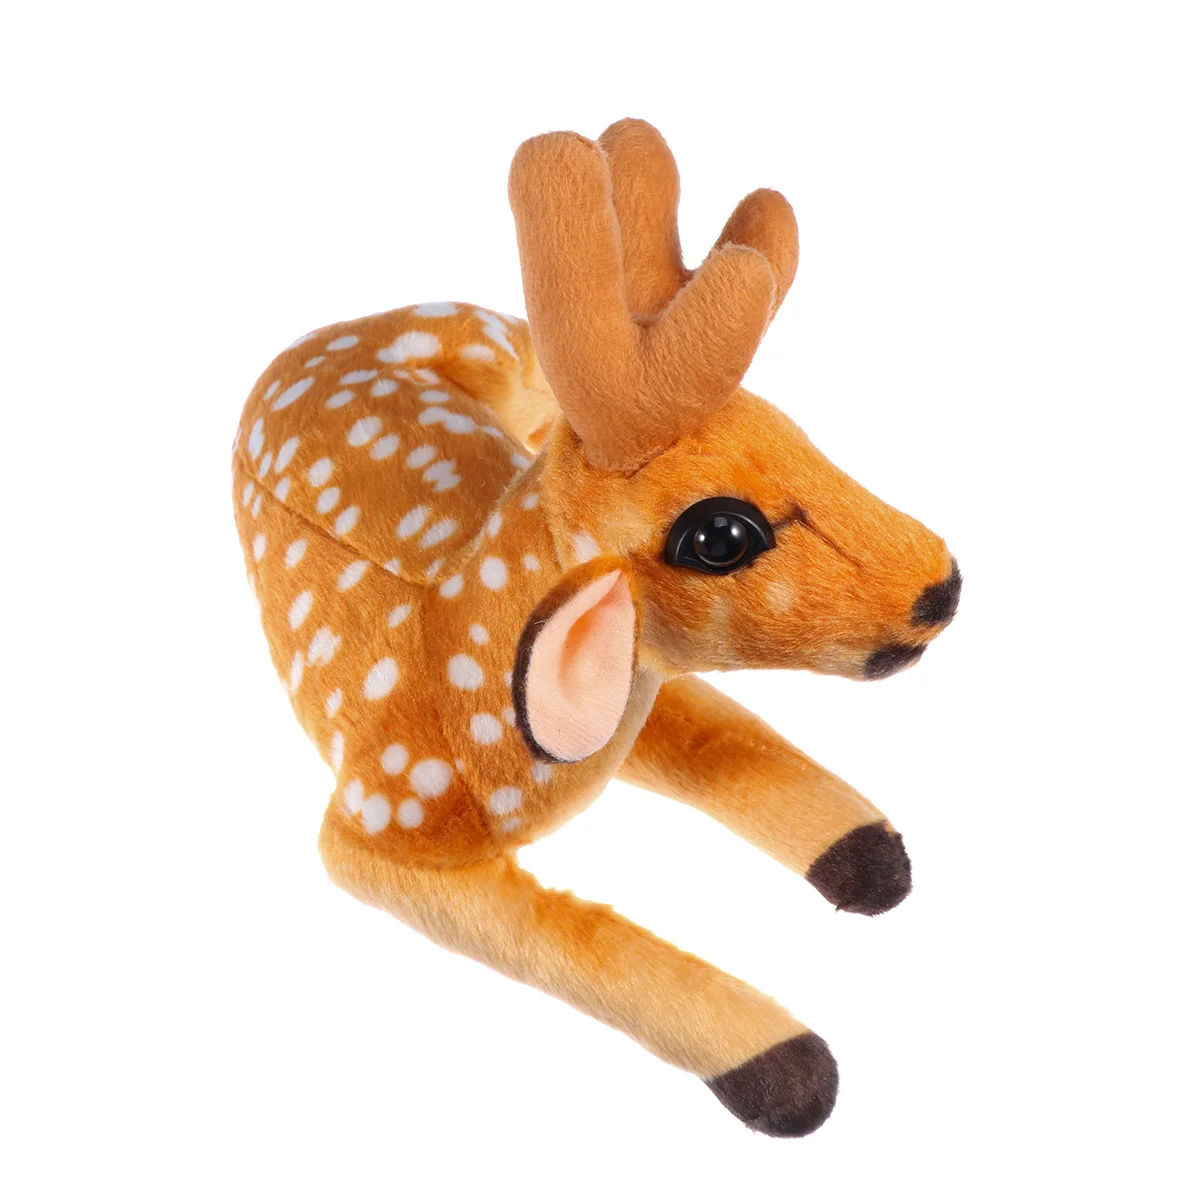 

Christmas Plush Toys Hugging Plush Pillow Forest Wild Plush Stuffed Simulation Sika Deer for Girlfriend Birthday Party Gift